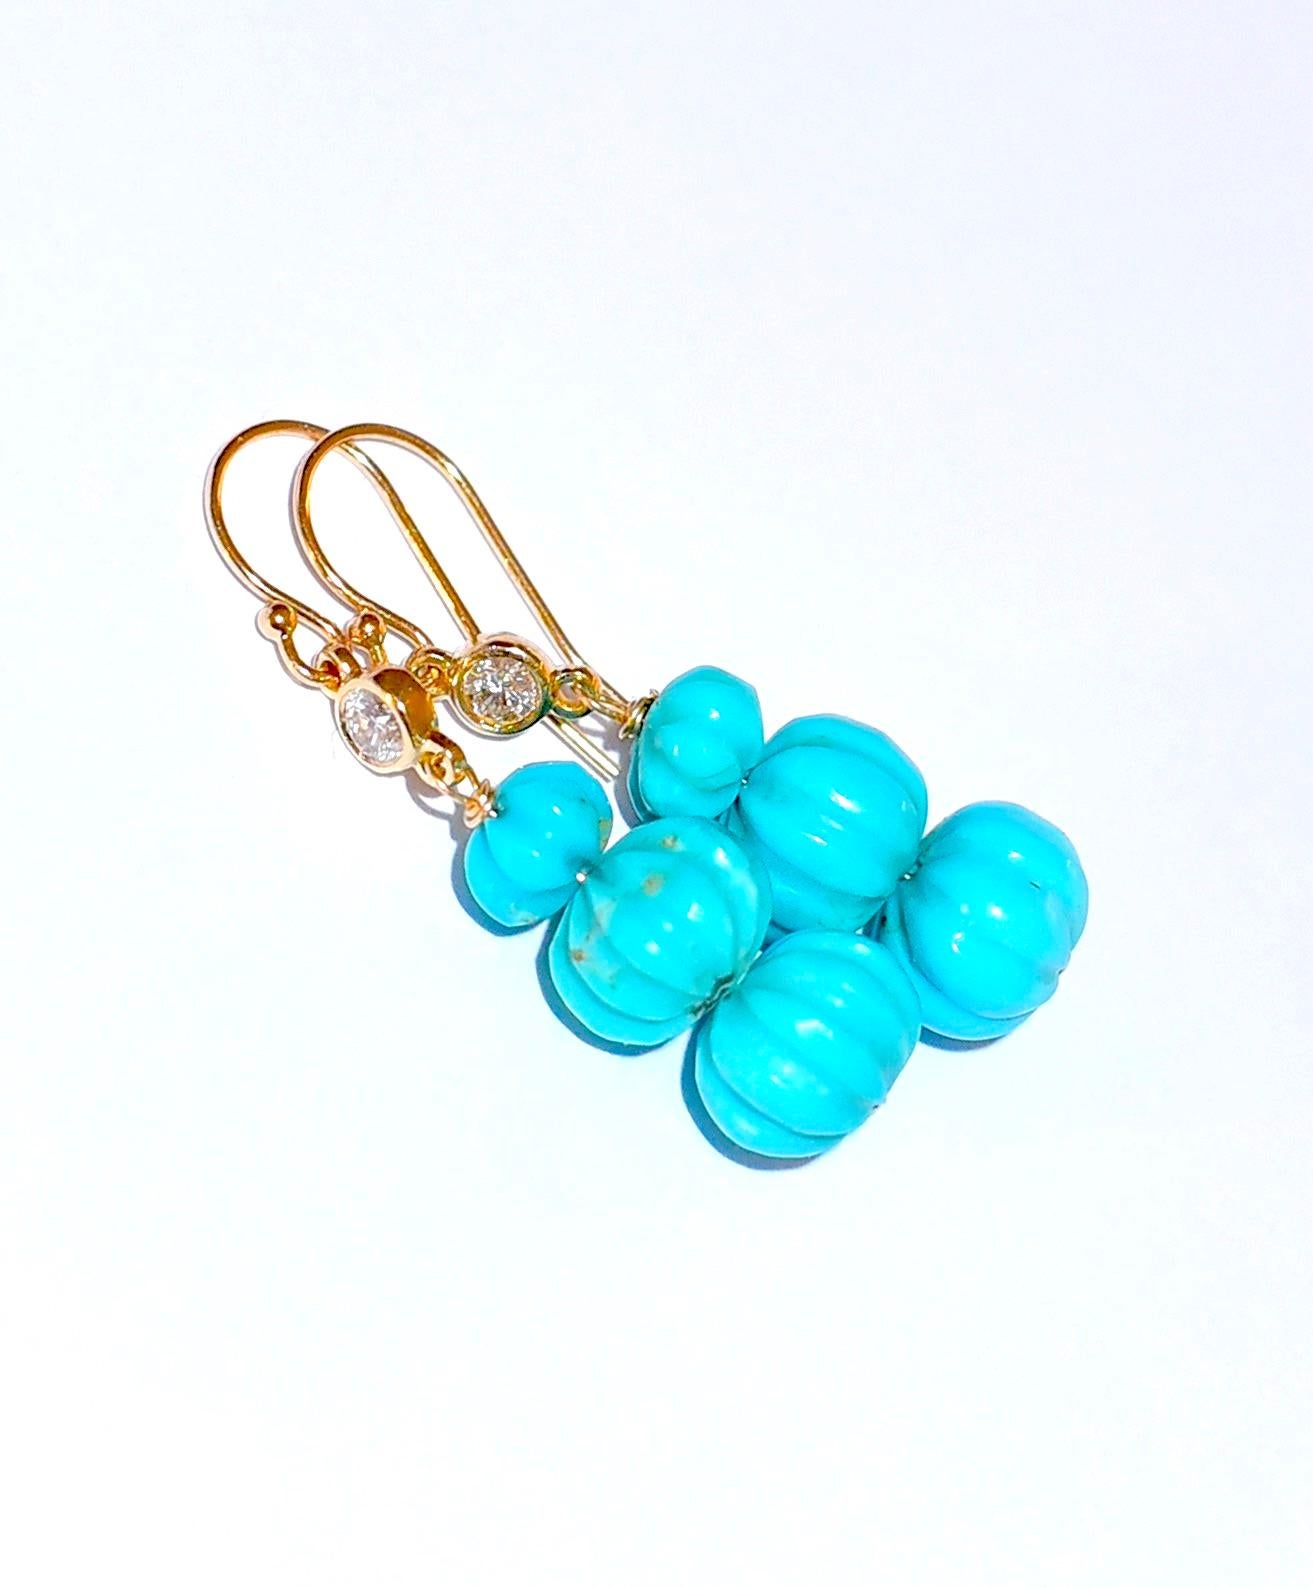 Bead Kingman Turquoise and White Diamond Earrings in 14K Solid Yellow Gold